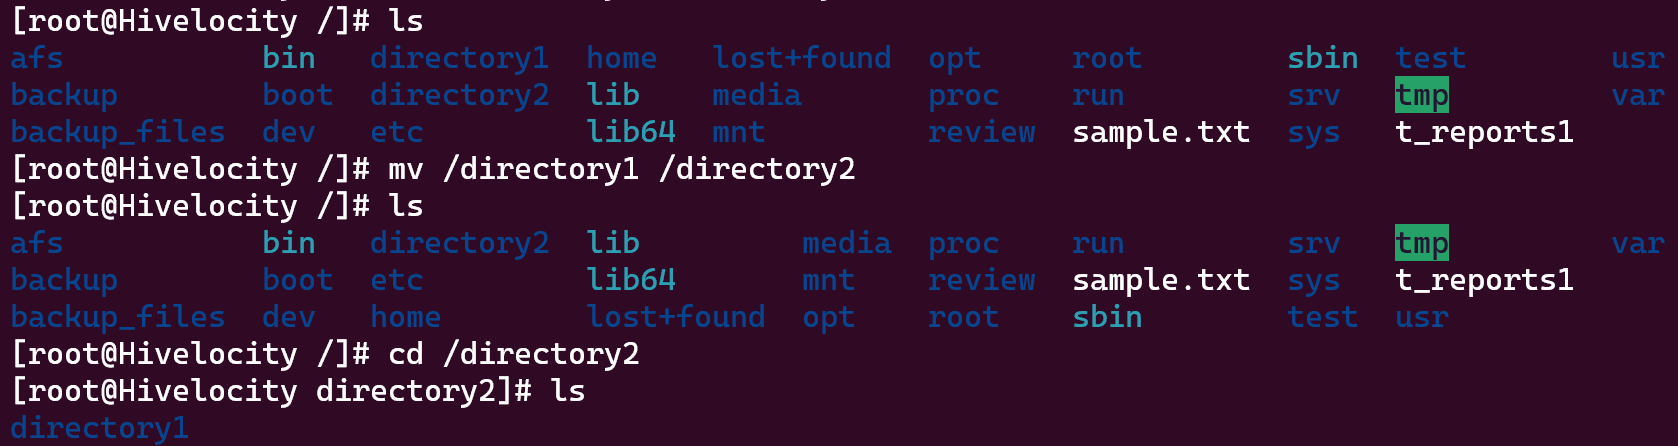 screenshot showing the results of the command mv /directory1 /directory2.